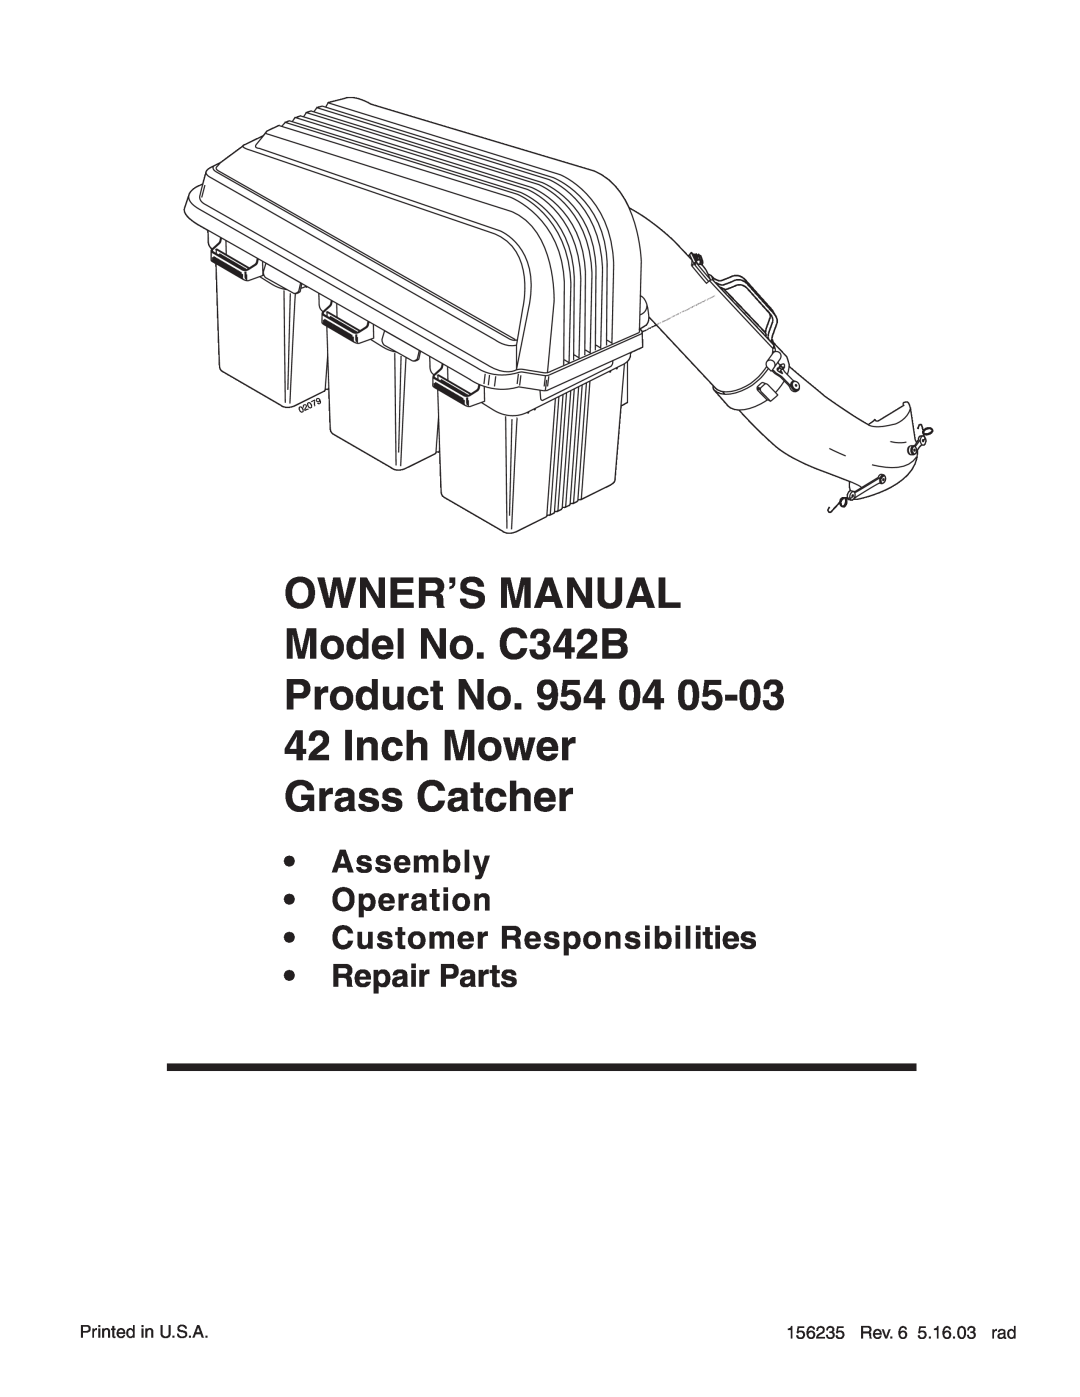 Poulan 954 04 05-03 owner manual Inch Mower Grass Catcher, •Assembly •Operation •Customer Responsibilities, Repair Parts 